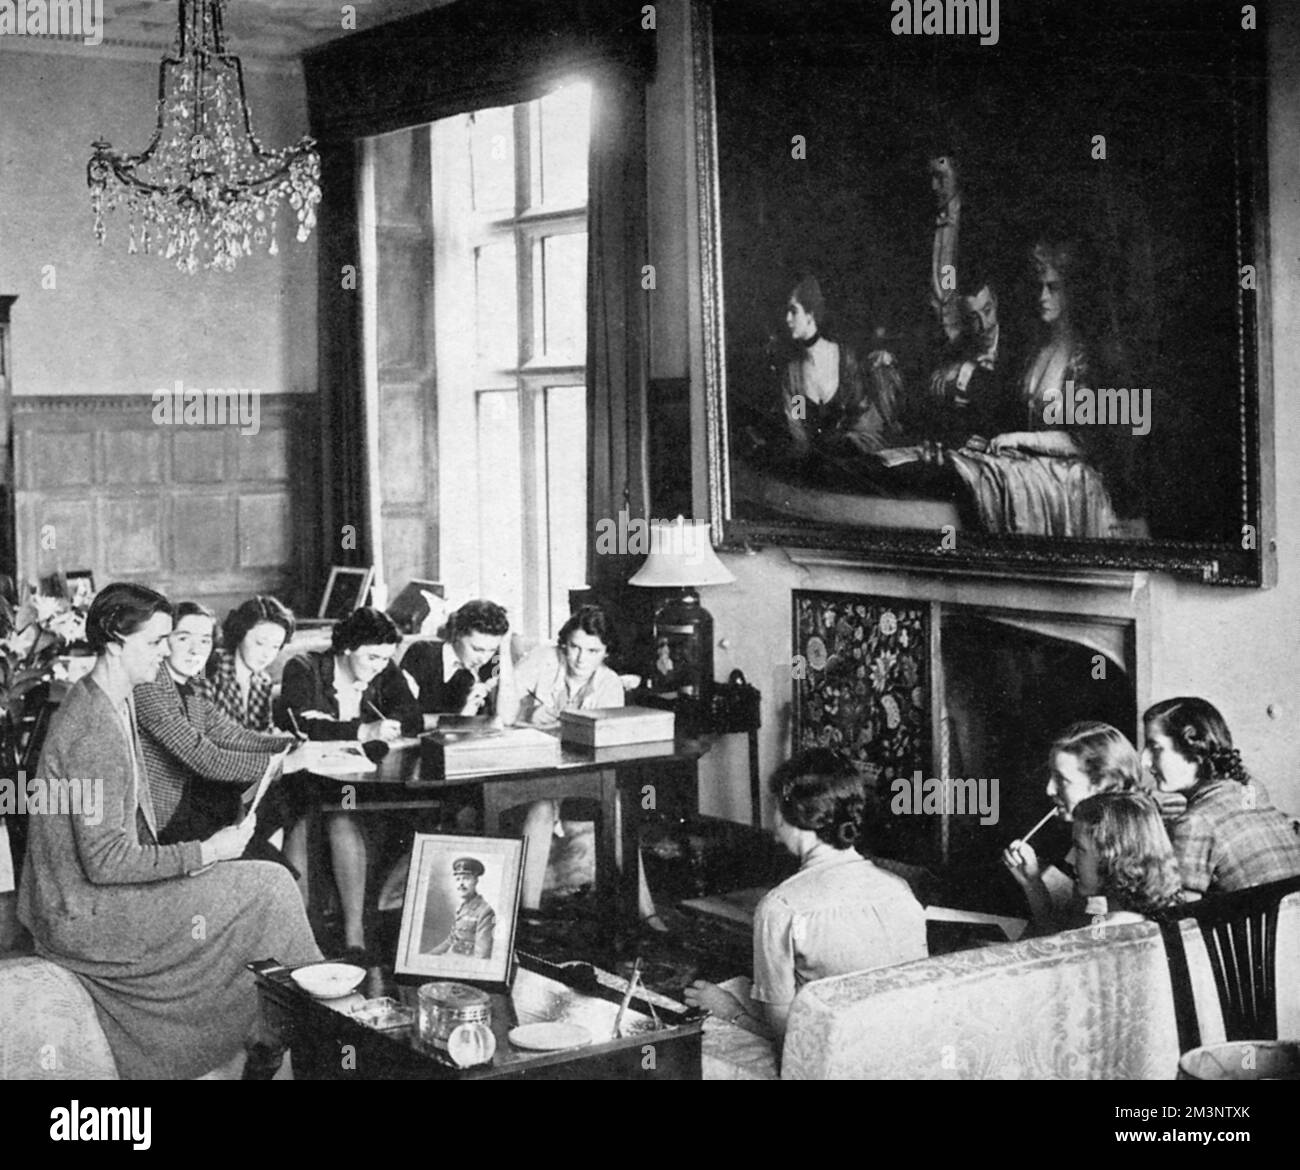 A finishing school for wartime debutantes relocated from Florence to a large country house in Hampshire.  Here, girls who would in peacetime have been sent abroad to learn a foreign language and be 'finished', also learn more practical skills such as first aid, home nursing, domestic science and cookery.       Date: 1939 Stock Photo